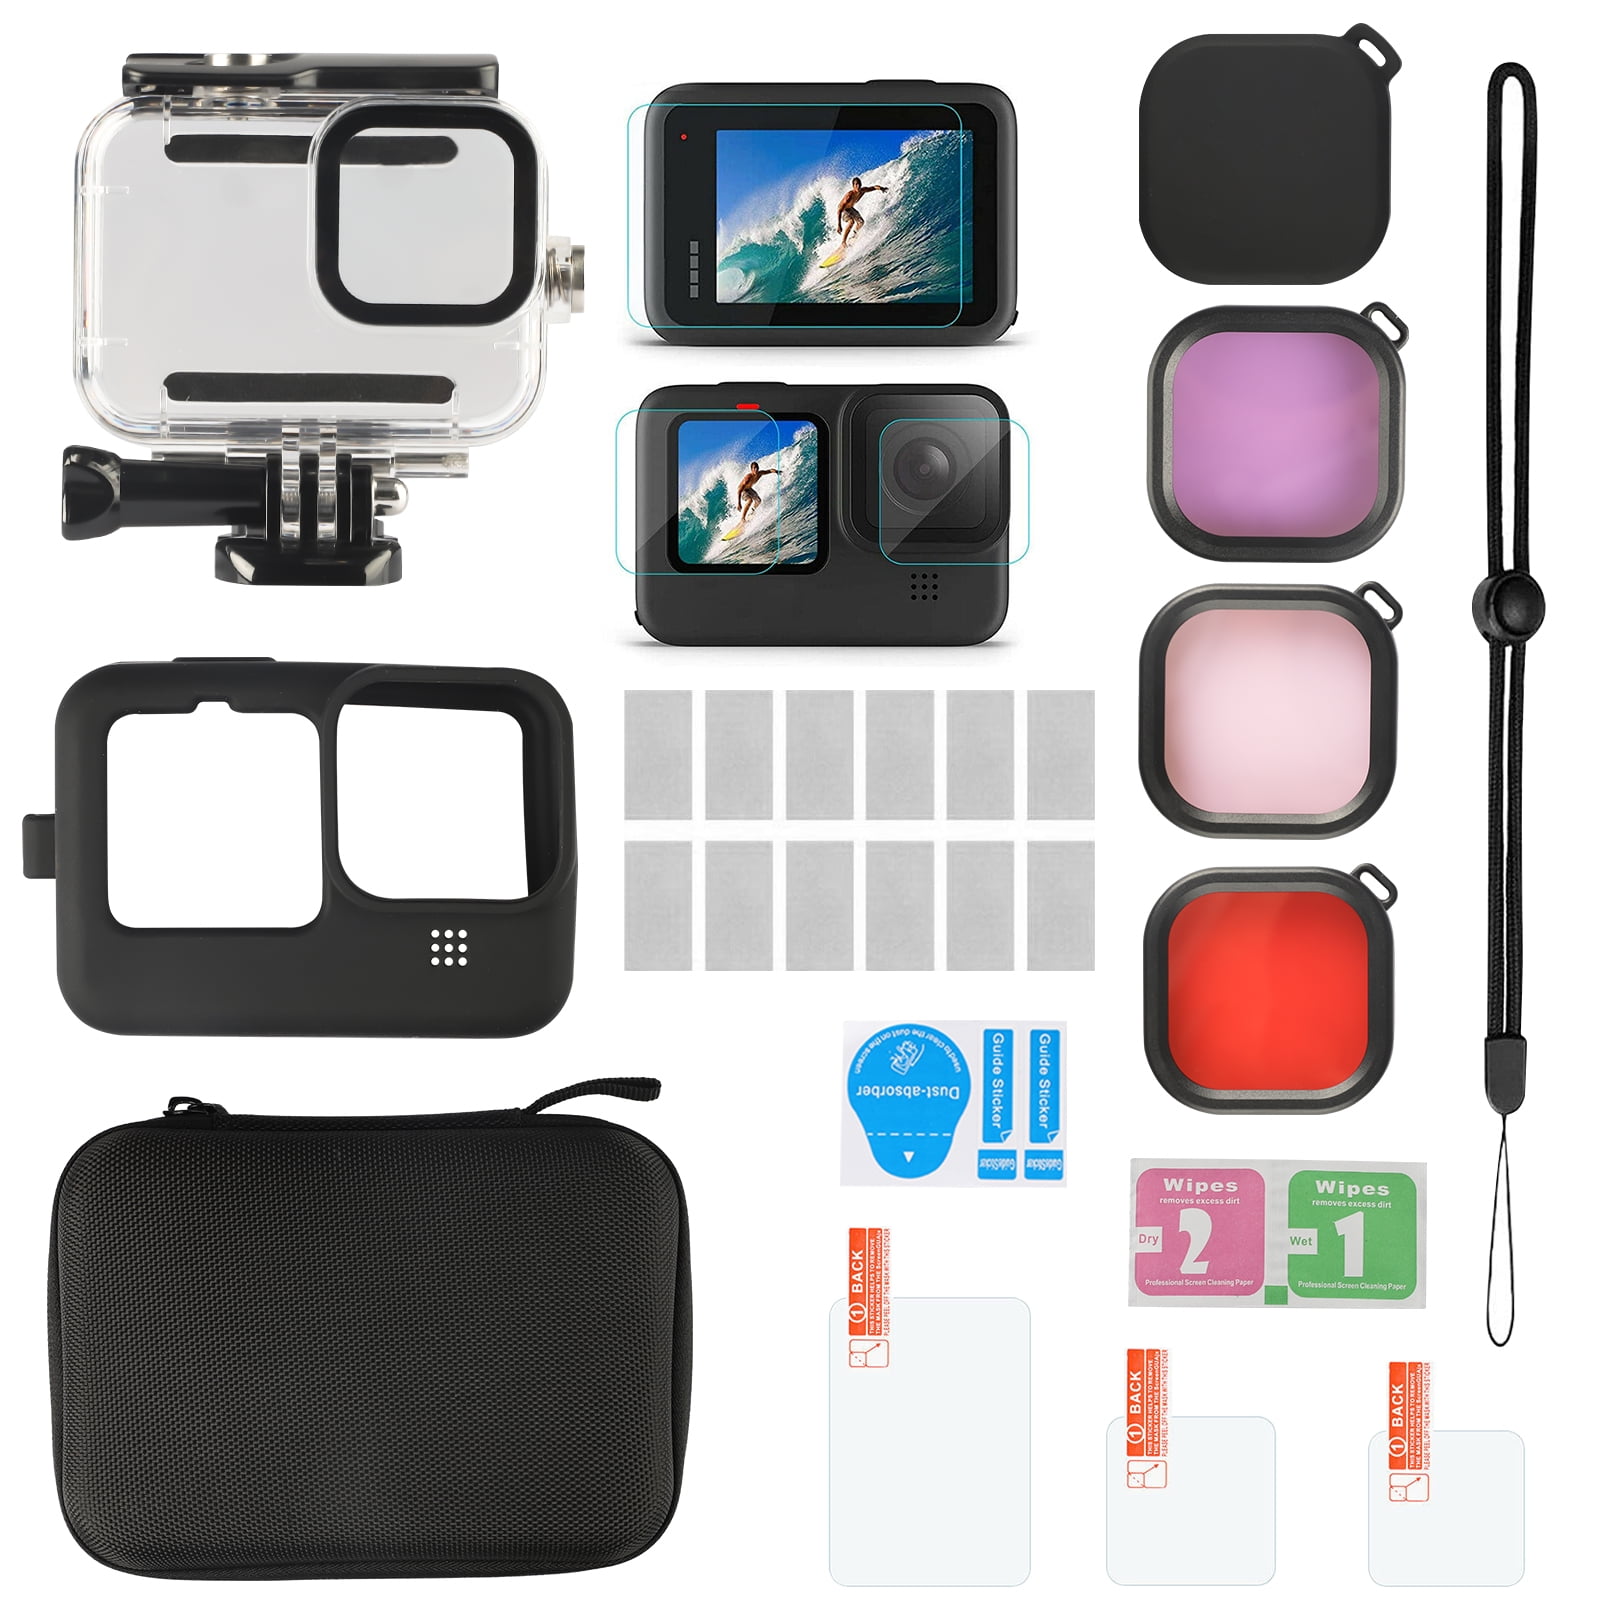 Yisau Case for GoPro Hero 9 Black with Screen Protector & Lens Protector KIT Includes Silicone Lens Cap & HD Tempered Glass Front & Rear Protective Film&Lens Protector Gopro 9 Accessories Black 